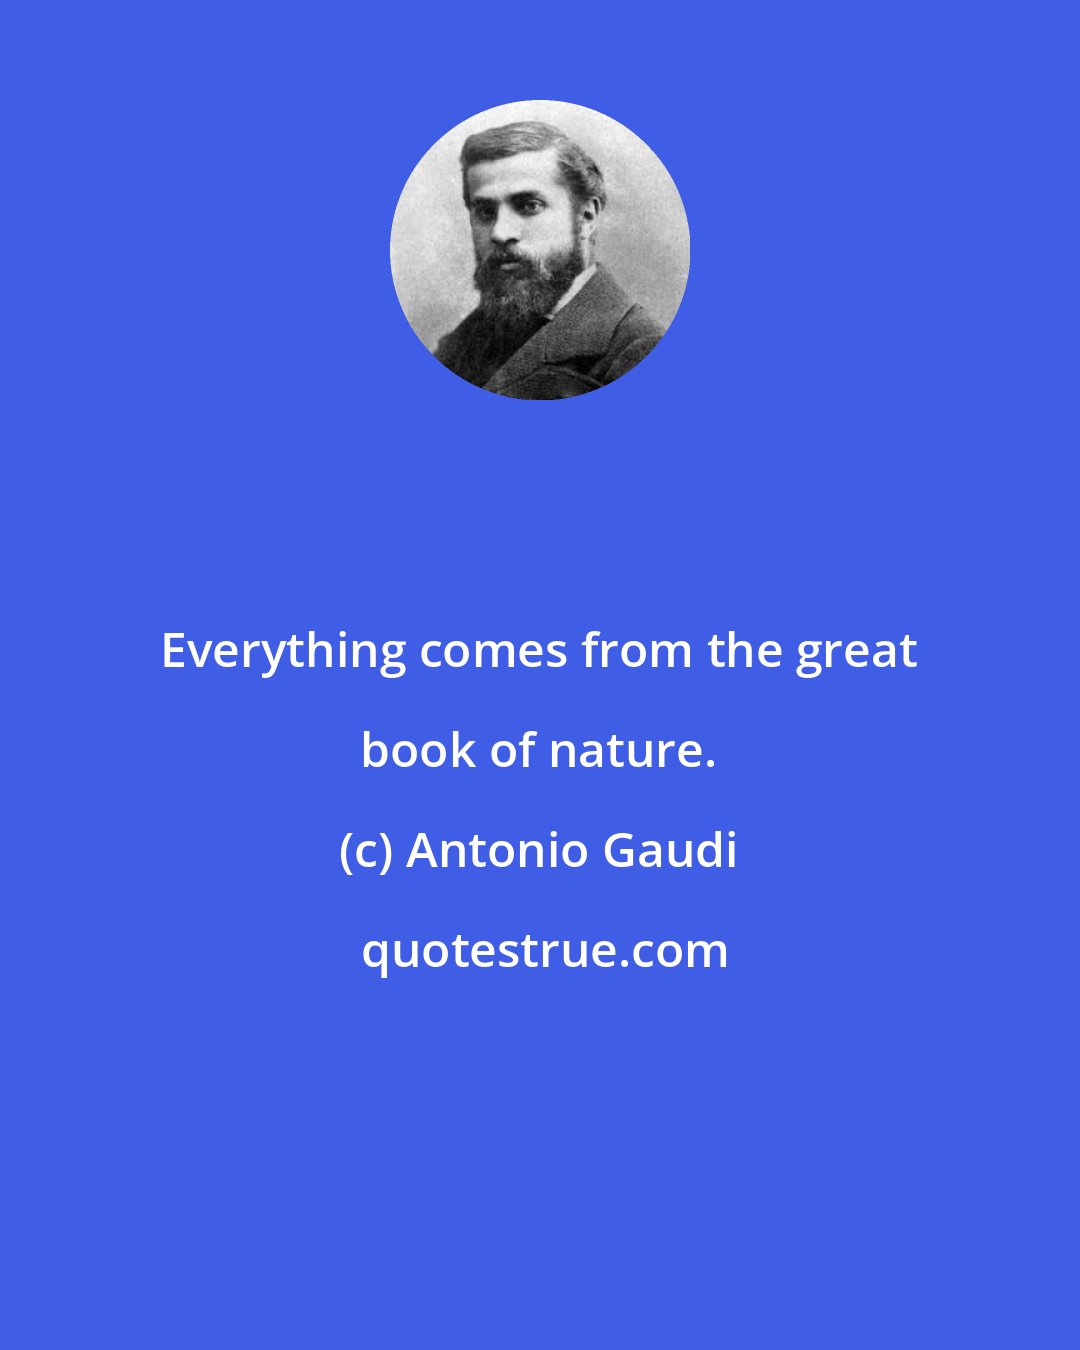 Antonio Gaudi: Everything comes from the great book of nature.